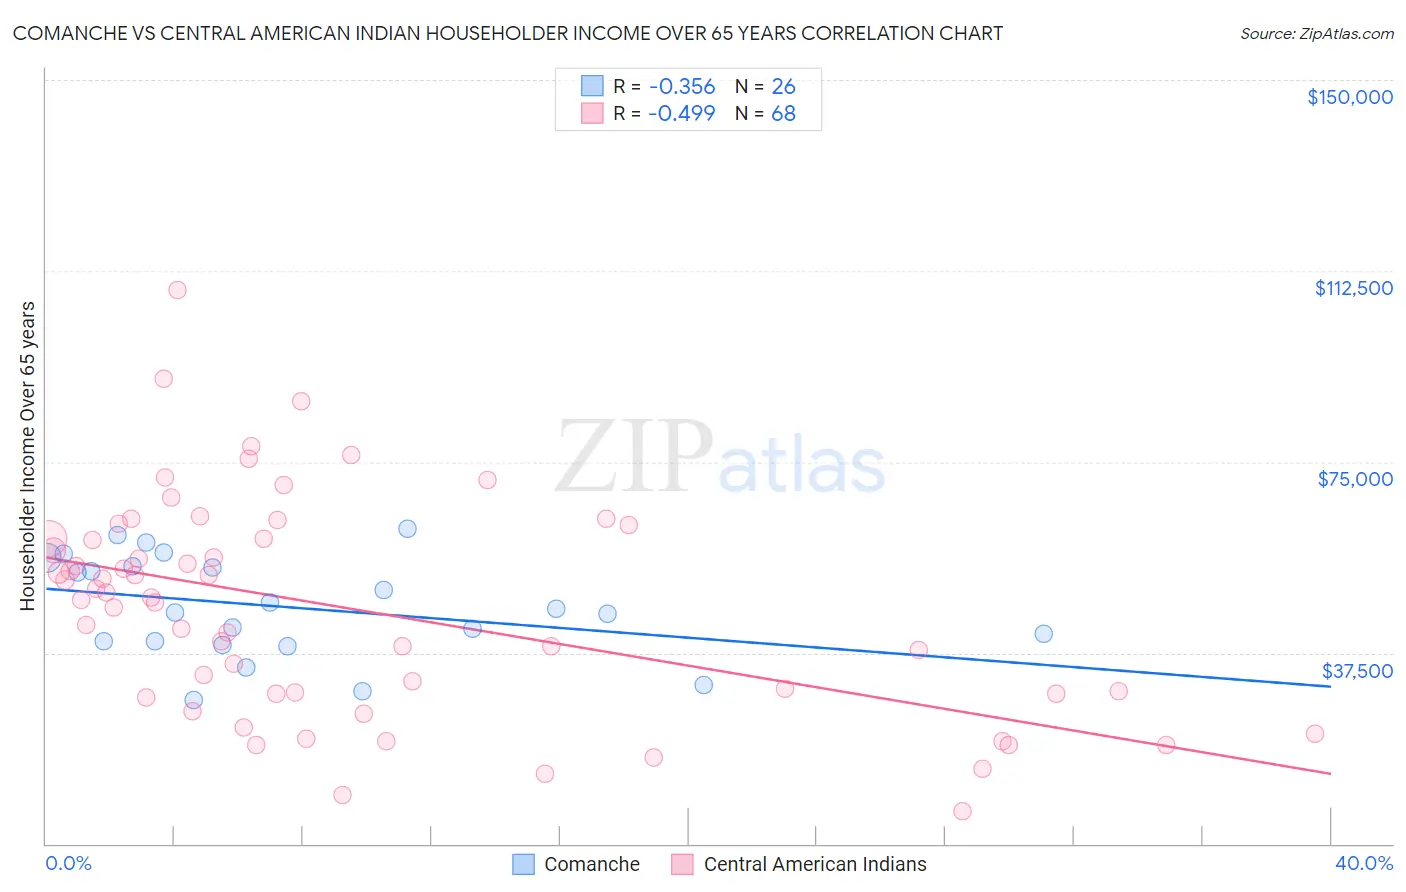 Comanche vs Central American Indian Householder Income Over 65 years